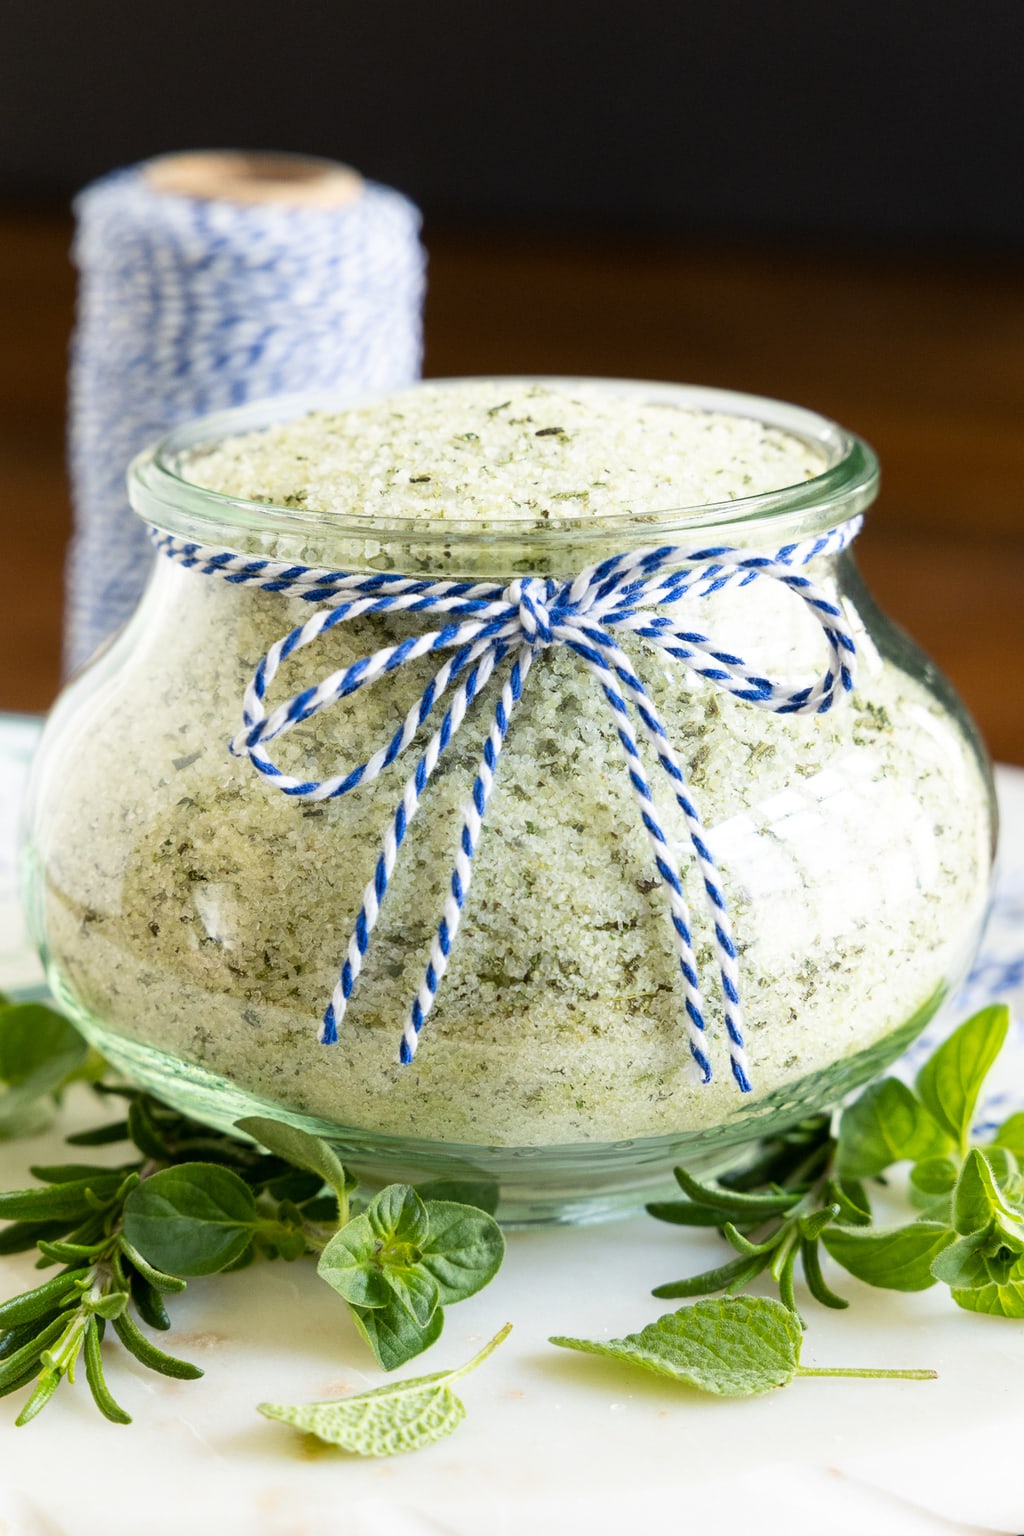 Vertical closeup photo of a glass Weck jar filled with Tuscan Herbed Sea Salt (Sale alle Erbe) and surrounded by fresh herbs.